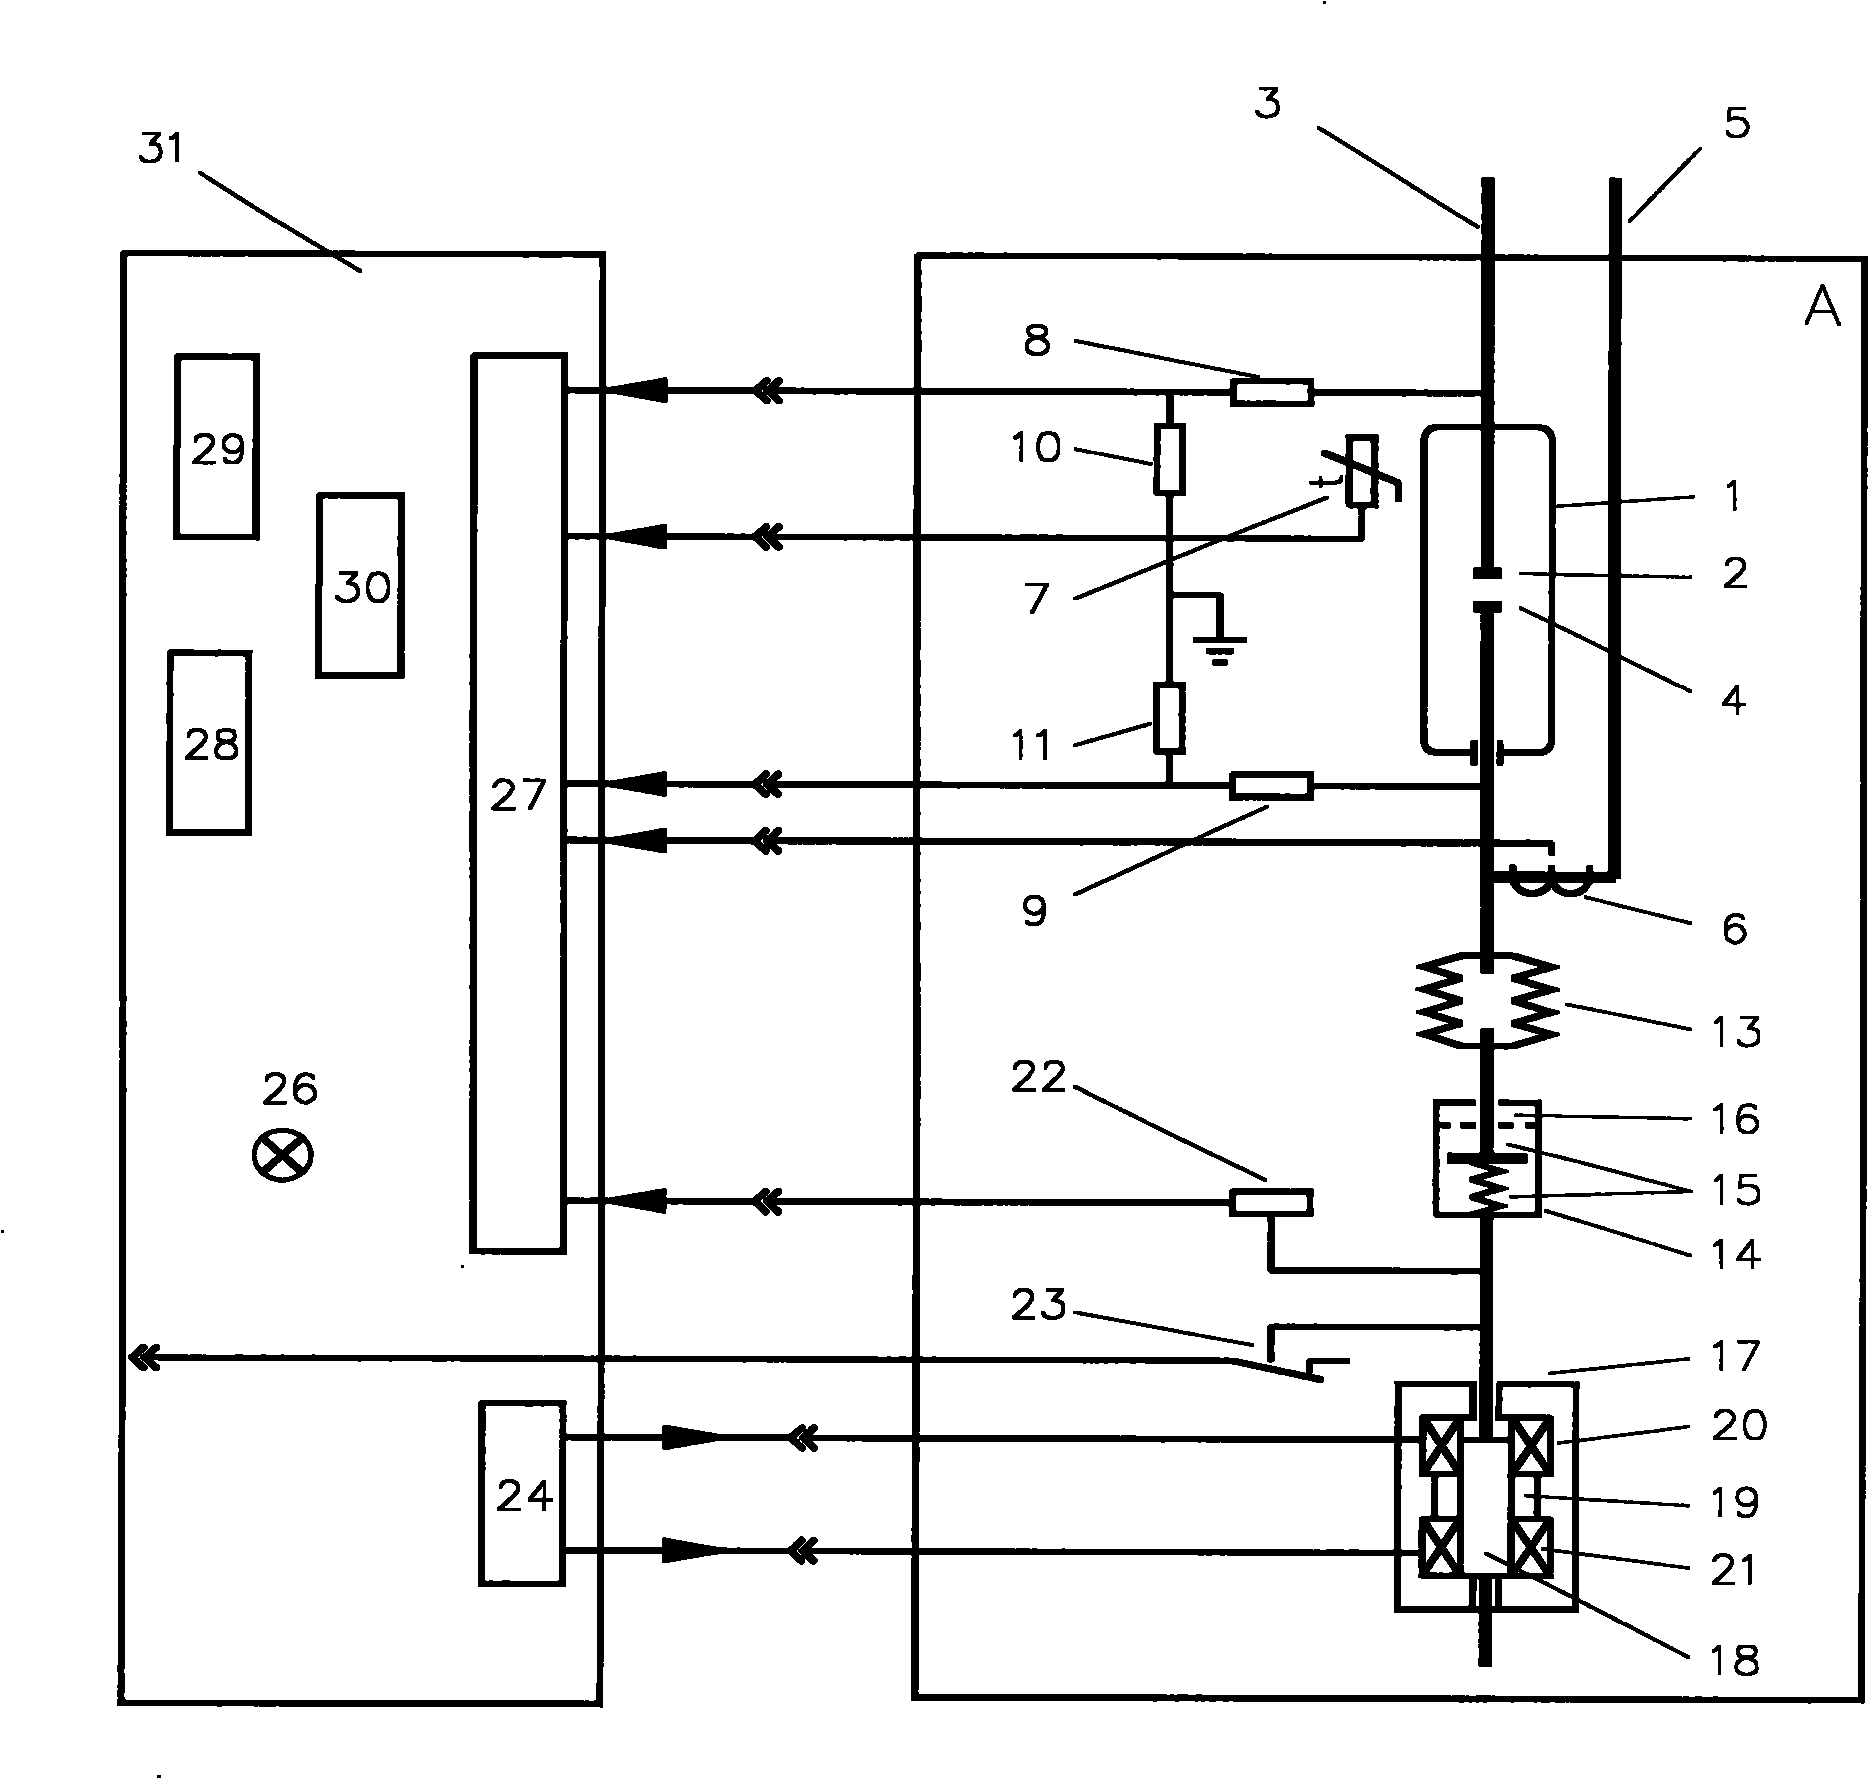 Switching appliance for AC circuit